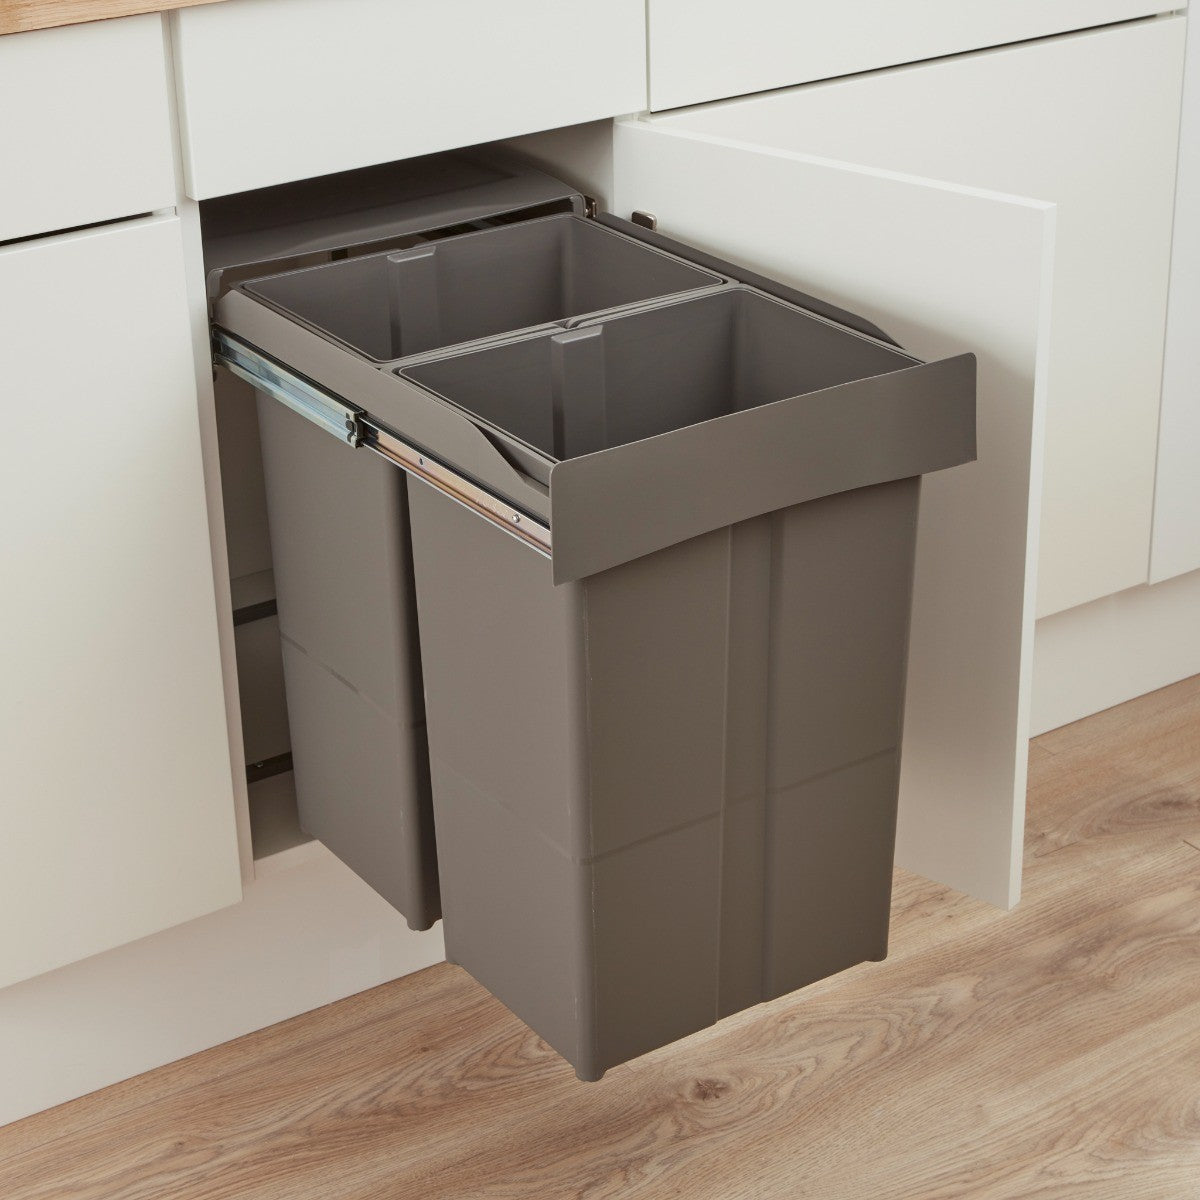 Wesco Big Bio 2 Compartment 58 litre in-cupboard kitchen recycling bin for 400mm wide hinged door cabinet 757WS829-72